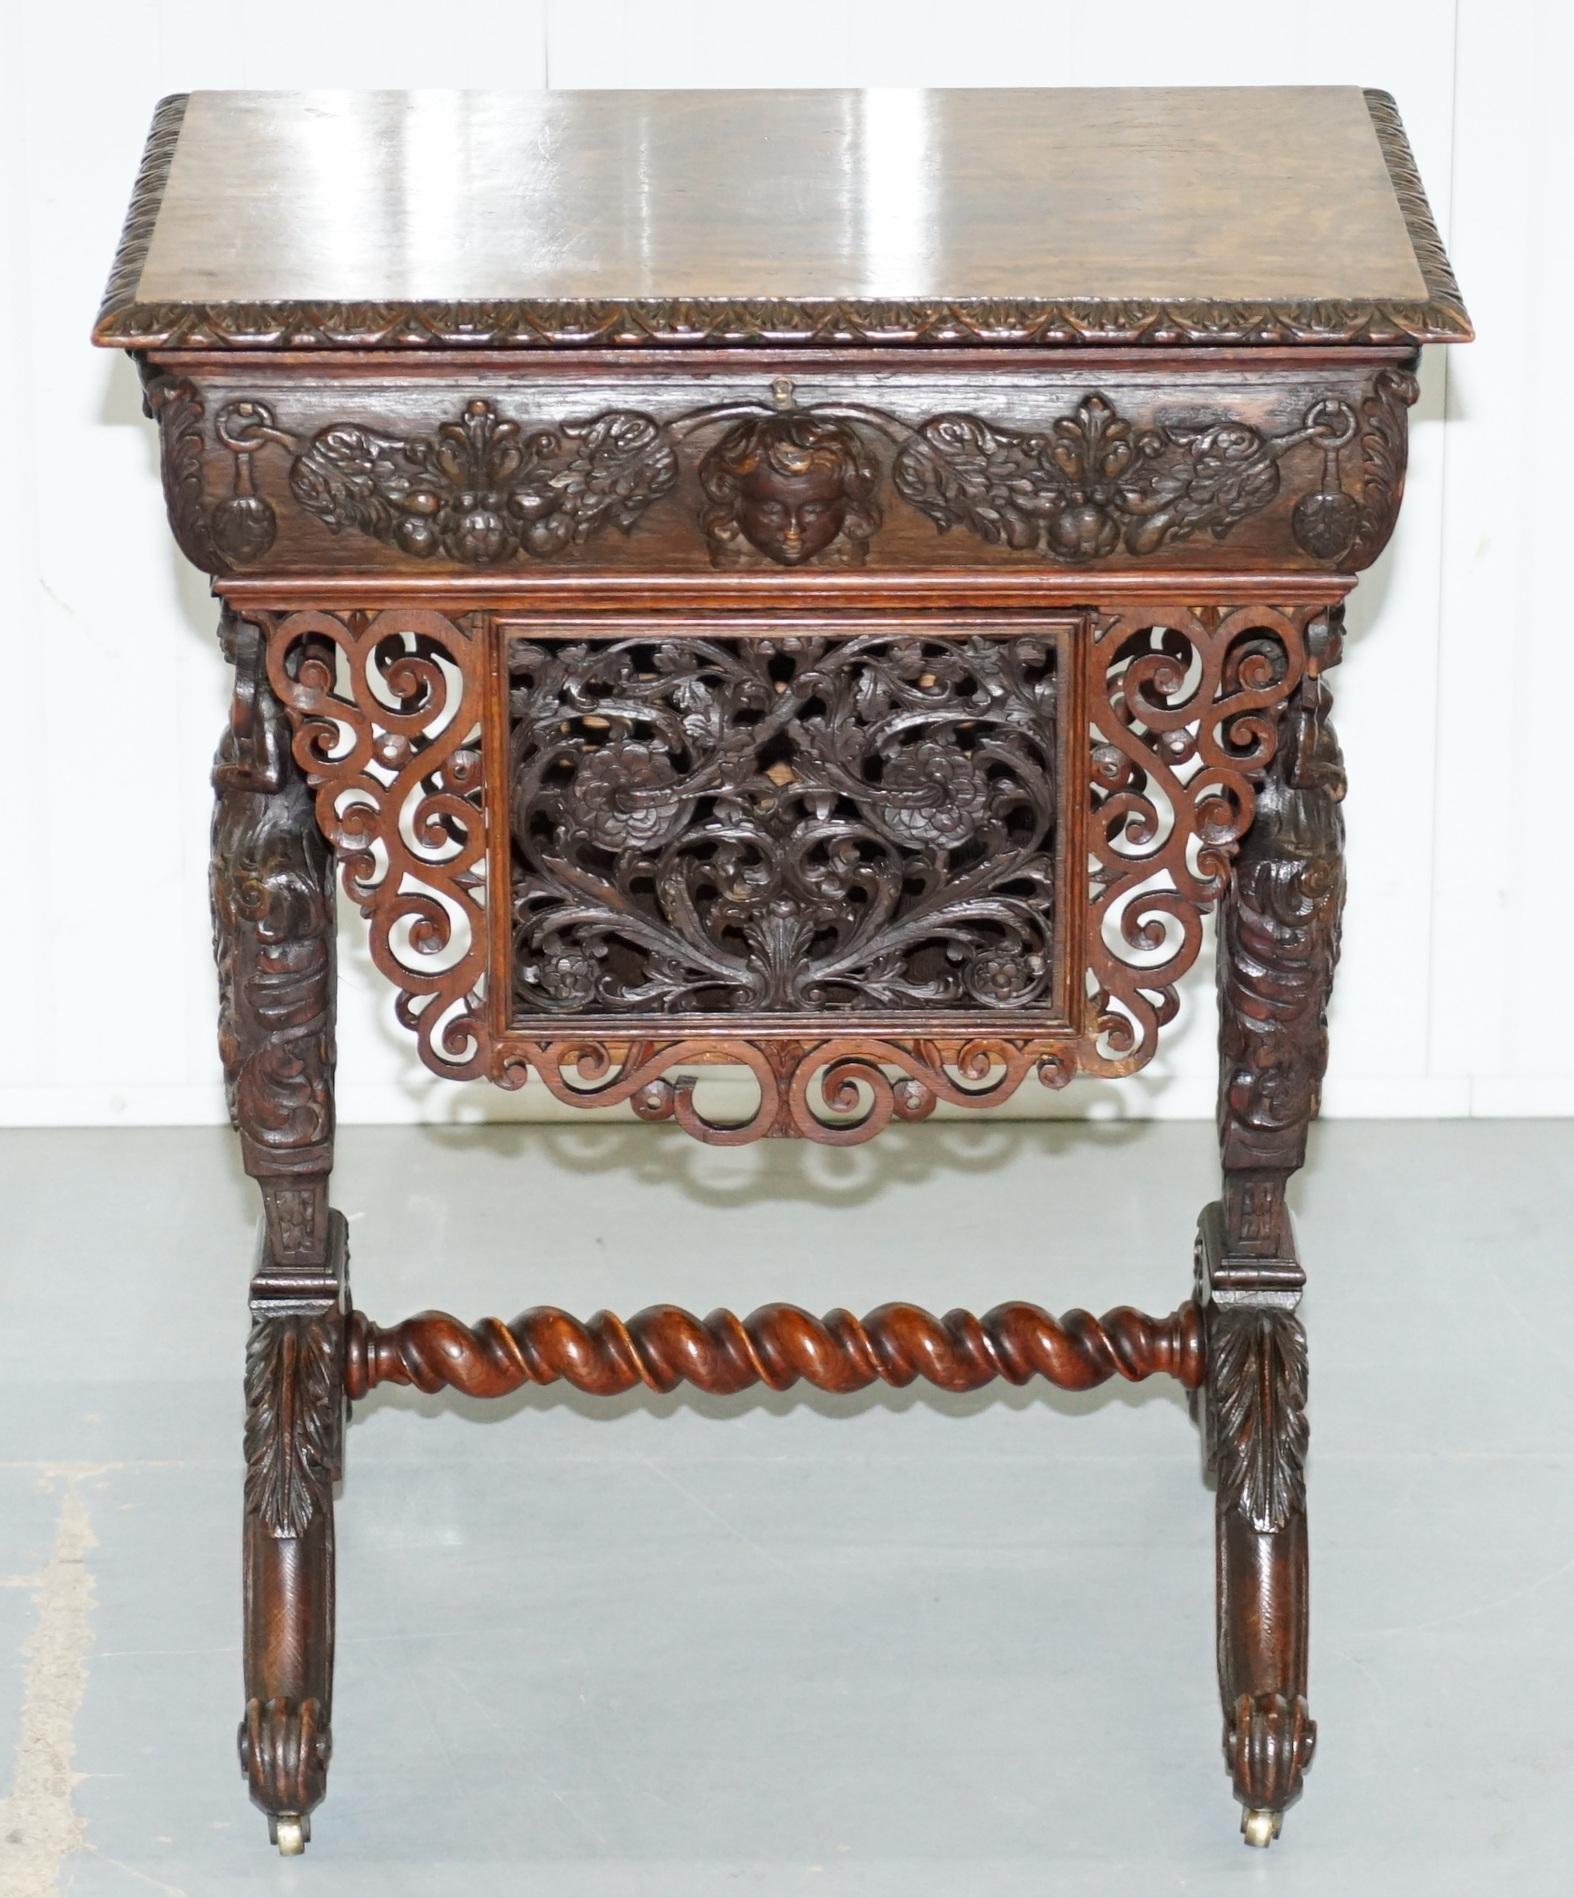 We are delighted to offer for sale this lovely original Victorian hand carved from top to bottom sewing table with angels / putti figured heads in the 17th century manor

A truly glorious piece, it must have taken the craftsman months to complete,